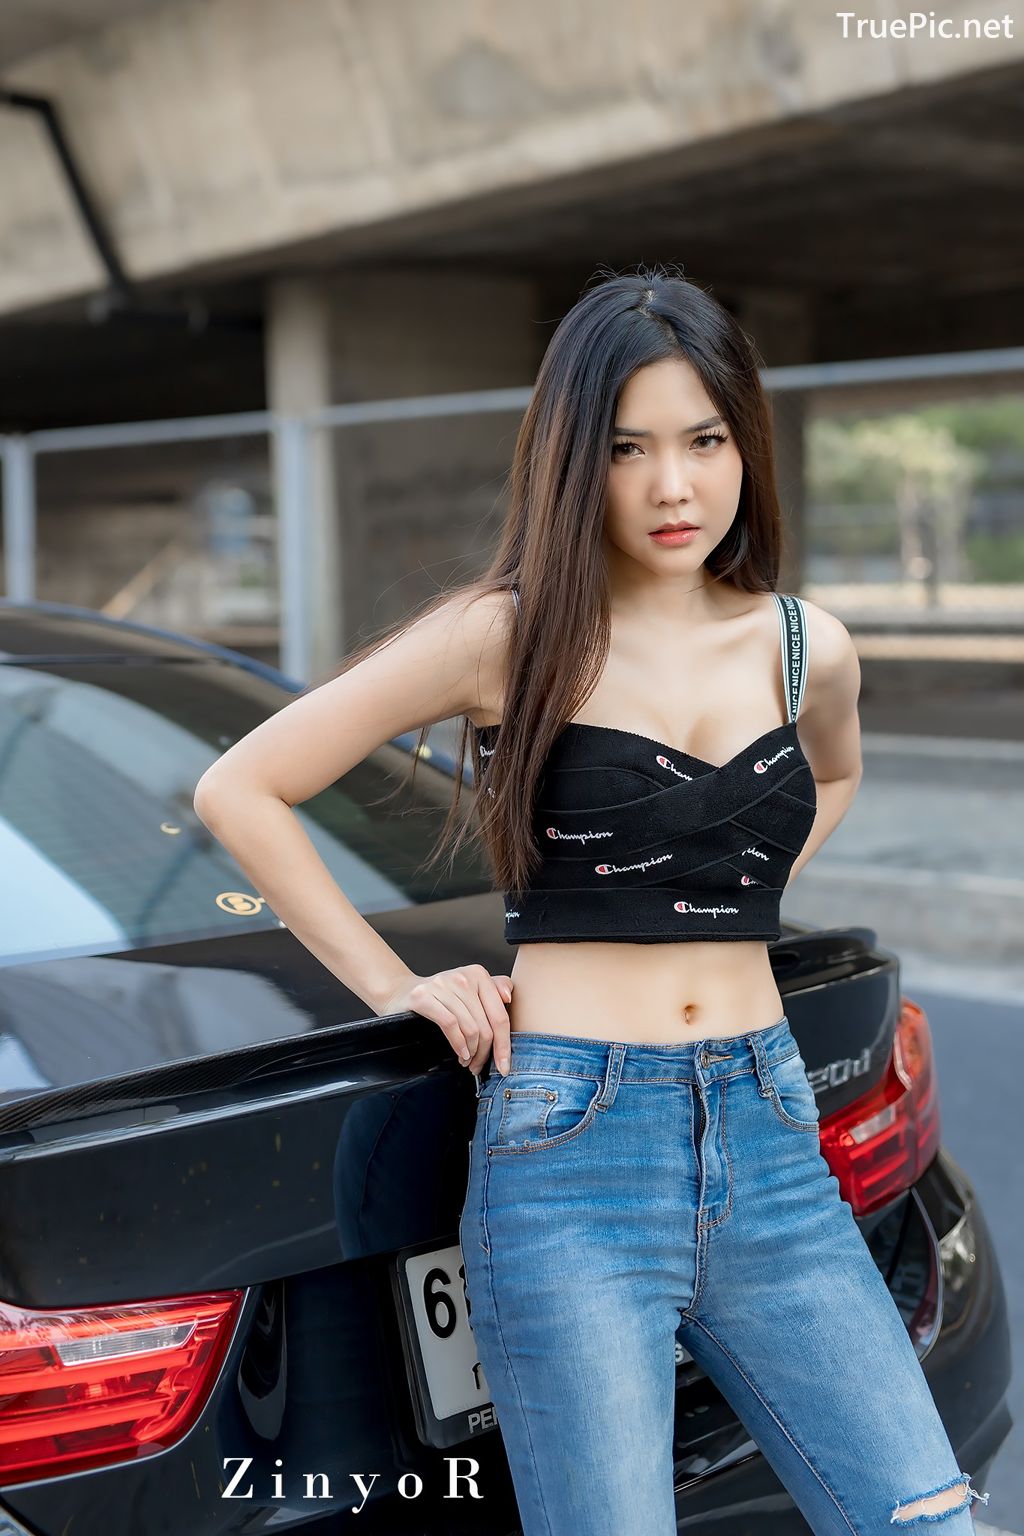 Image-Thailand-Model-Phitchamol-Srijantanet-Black-Crop-Top-and-Jean-TruePic.net- Picture-20